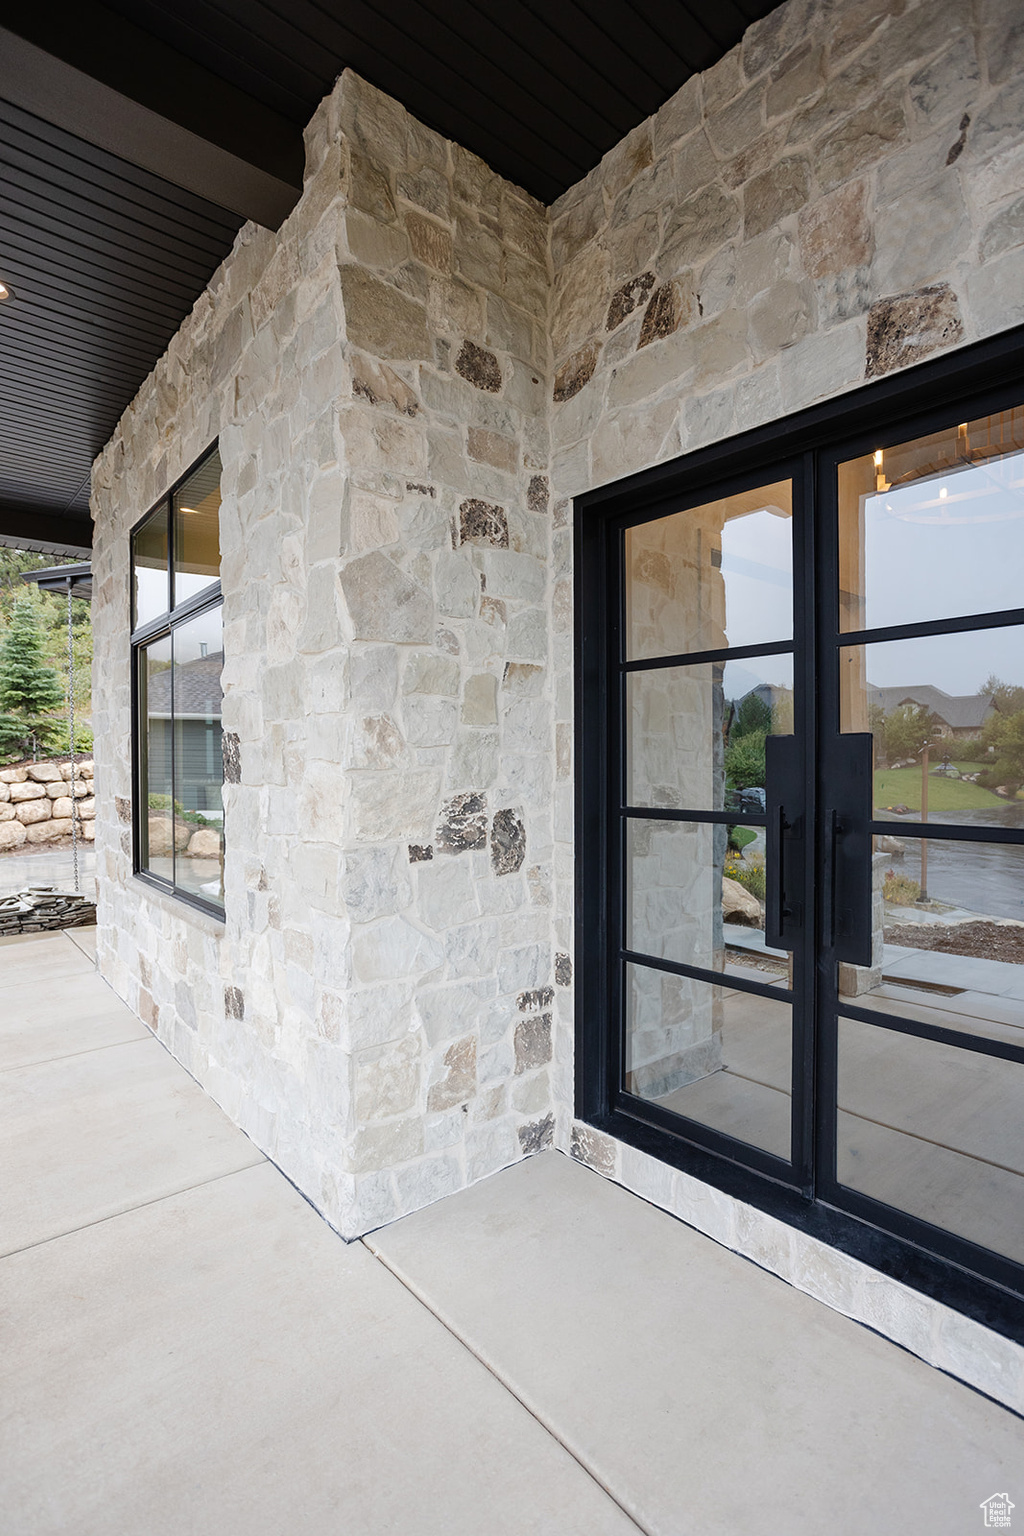 Entrance to home featuring a patio area and french doors